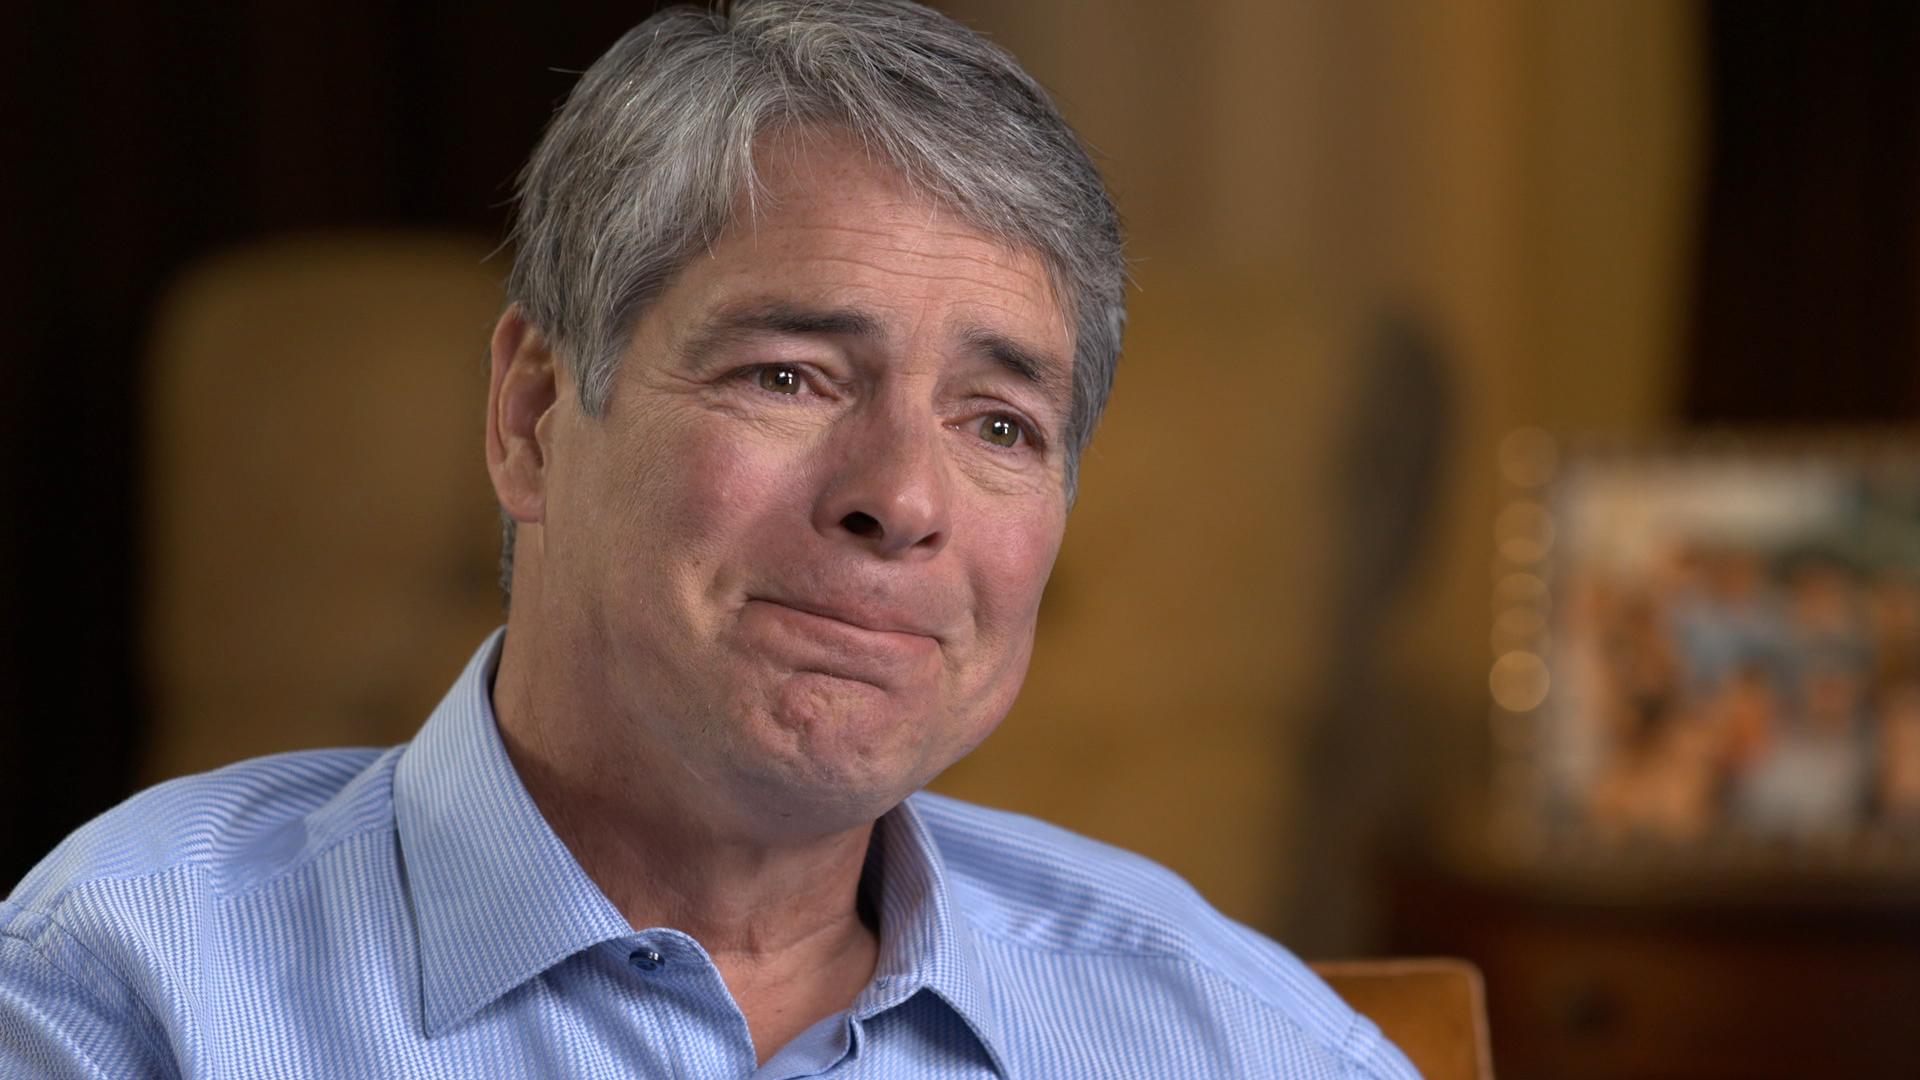 Watch 60 Minutes Overtime Tim Green on his "60 Minutes" interview